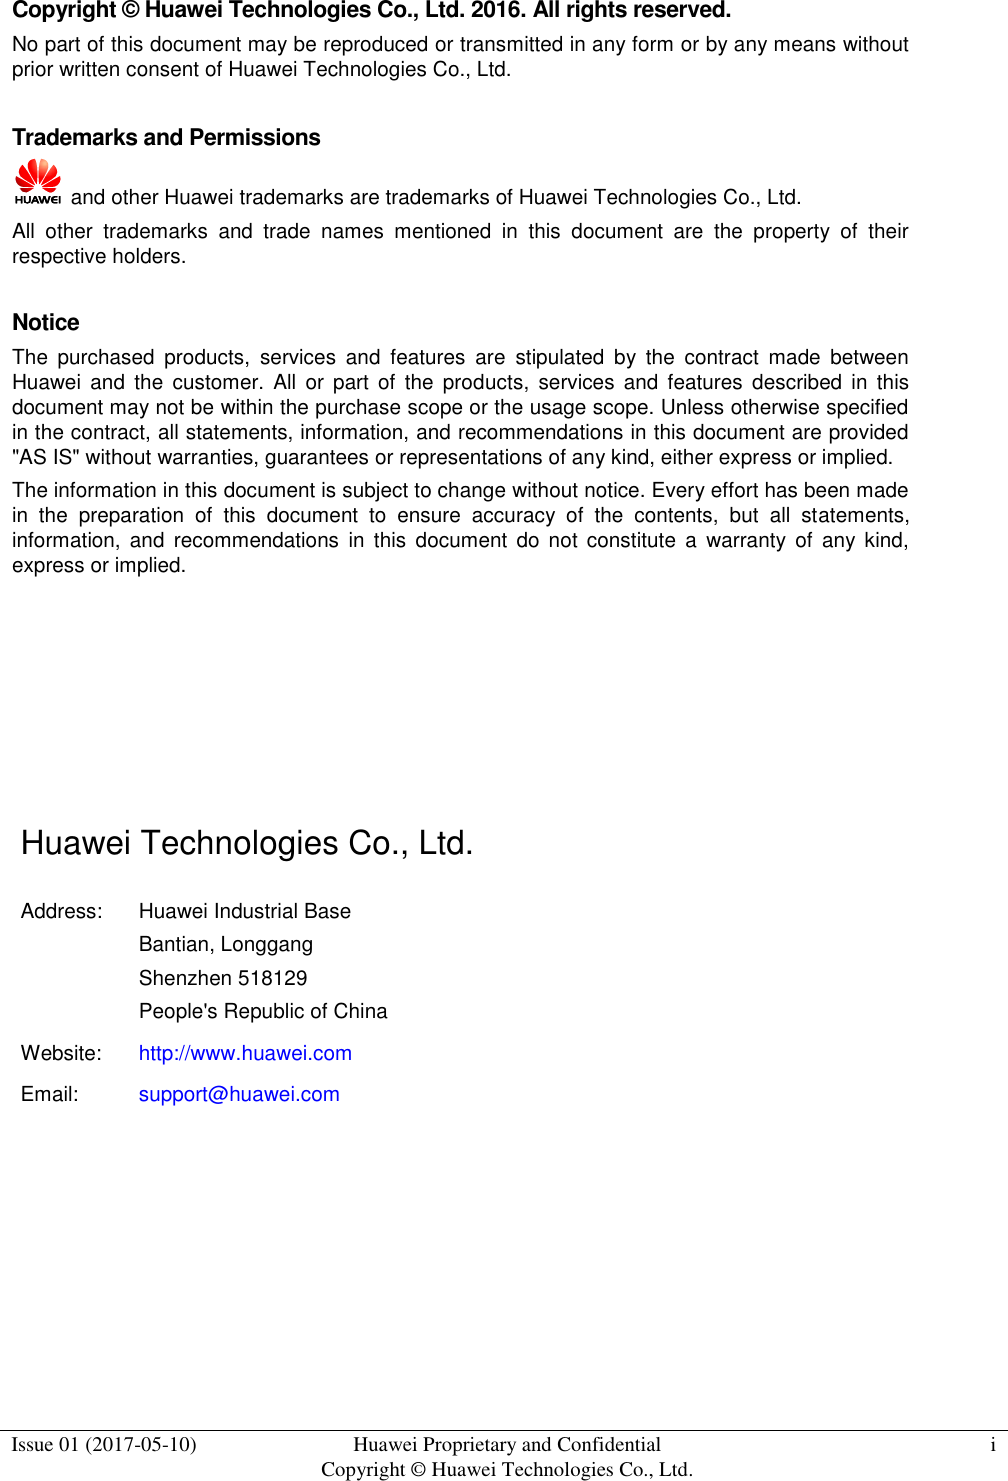  Issue 01 (2017-05-10) Huawei Proprietary and Confidential      Copyright © Huawei Technologies Co., Ltd. i  Copyright © Huawei Technologies Co., Ltd. 2016. All rights reserved. No part of this document may be reproduced or transmitted in any form or by any means without prior written consent of Huawei Technologies Co., Ltd.  Trademarks and Permissions    and other Huawei trademarks are trademarks of Huawei Technologies Co., Ltd. All  other  trademarks  and  trade  names  mentioned  in  this  document  are  the  property  of  their respective holders.  Notice The  purchased  products,  services  and  features  are  stipulated  by  the  contract  made  between Huawei  and  the  customer.  All  or  part  of  the  products,  services  and  features  described  in  this document may not be within the purchase scope or the usage scope. Unless otherwise specified in the contract, all statements, information, and recommendations in this document are provided &quot;AS IS&quot; without warranties, guarantees or representations of any kind, either express or implied. The information in this document is subject to change without notice. Every effort has been made in  the  preparation  of  this  document  to  ensure  accuracy  of  the  contents,  but  all  statements, information, and recommendations  in  this  document  do  not  constitute  a  warranty  of  any kind, express or implied.      Huawei Technologies Co., Ltd. Address: Huawei Industrial Base Bantian, Longgang Shenzhen 518129 People&apos;s Republic of China Website: http://www.huawei.com Email: support@huawei.com   